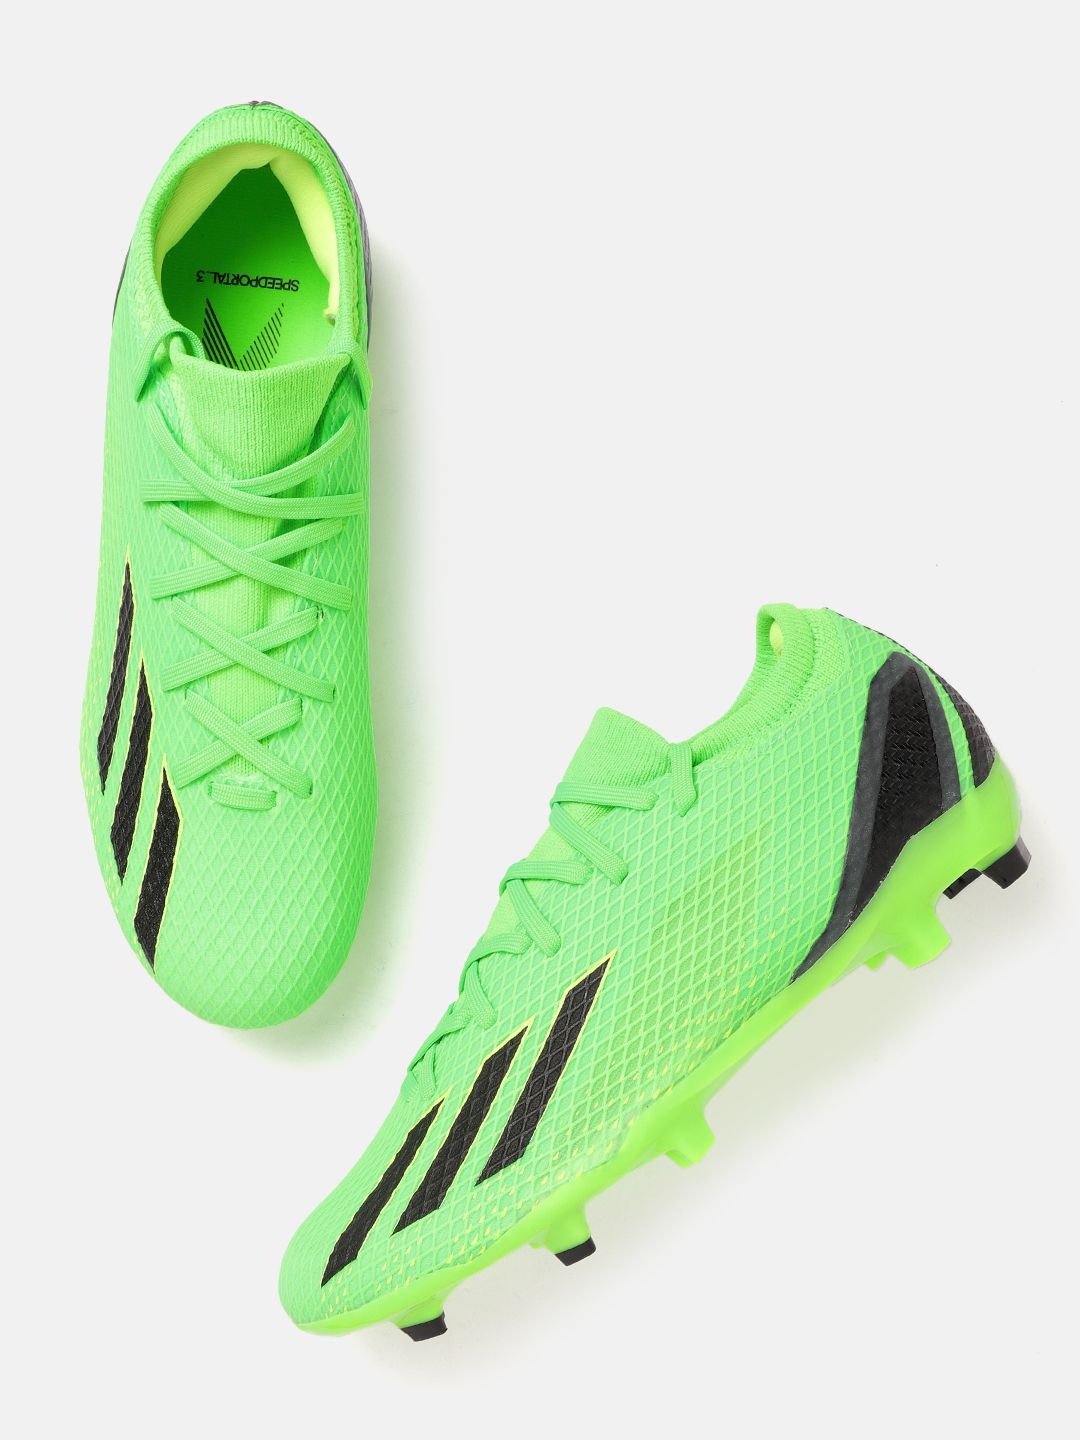 ADIDAS Unisex Lime Green X Speedportal.3 FG Football Shoes Price in India